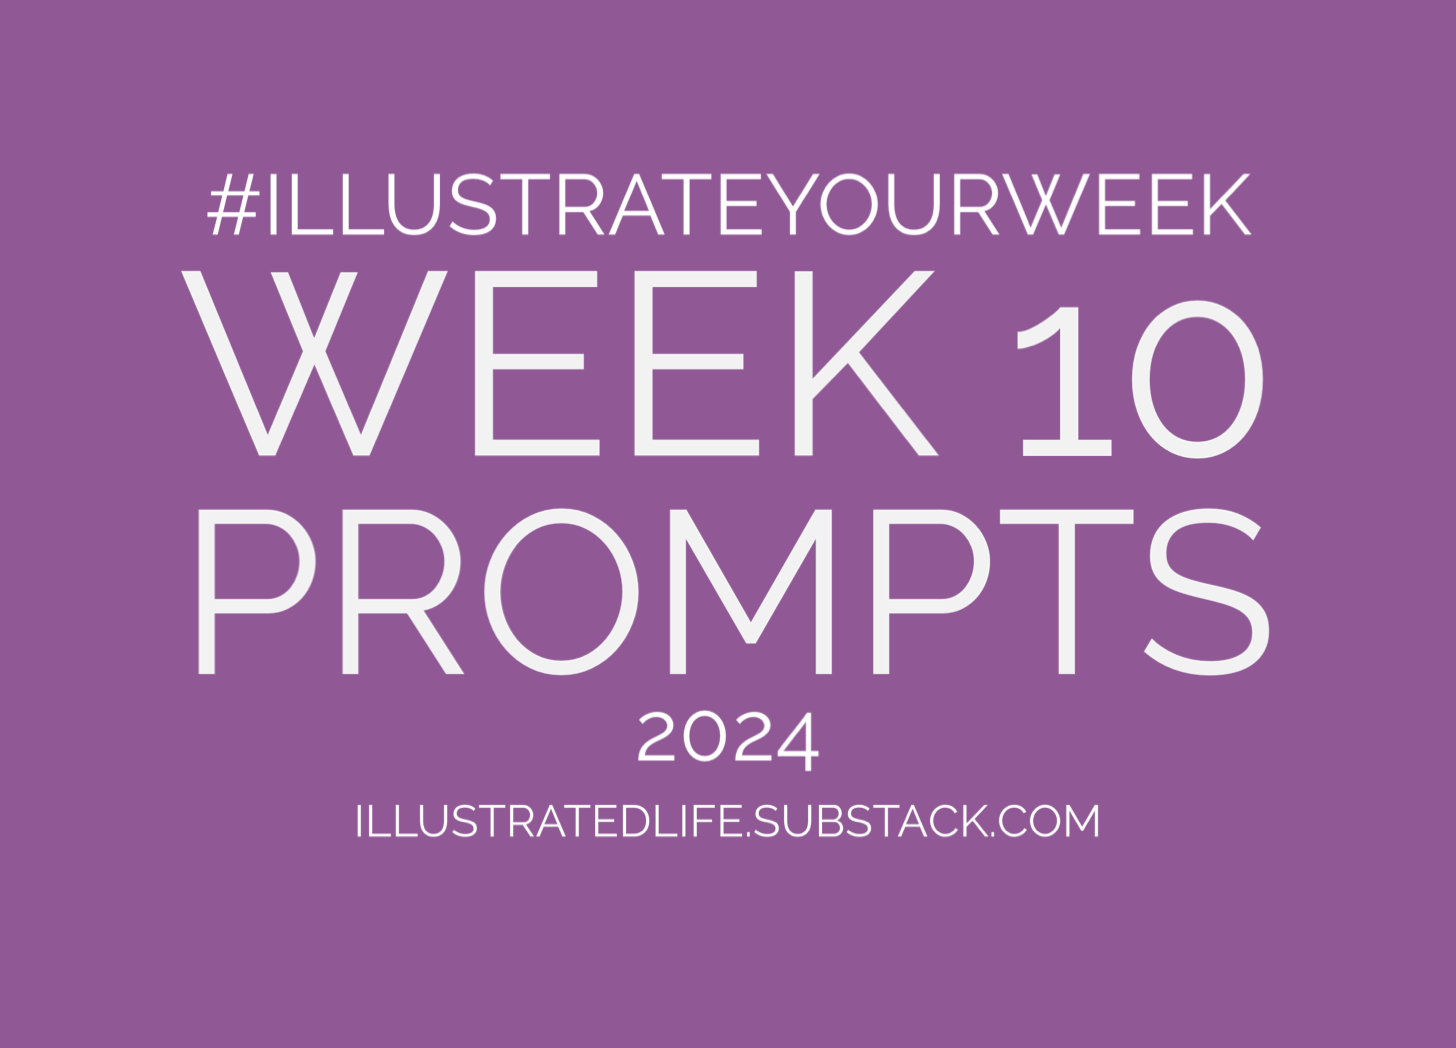 Week 10 Prompts for Illustrate Your Week 2024